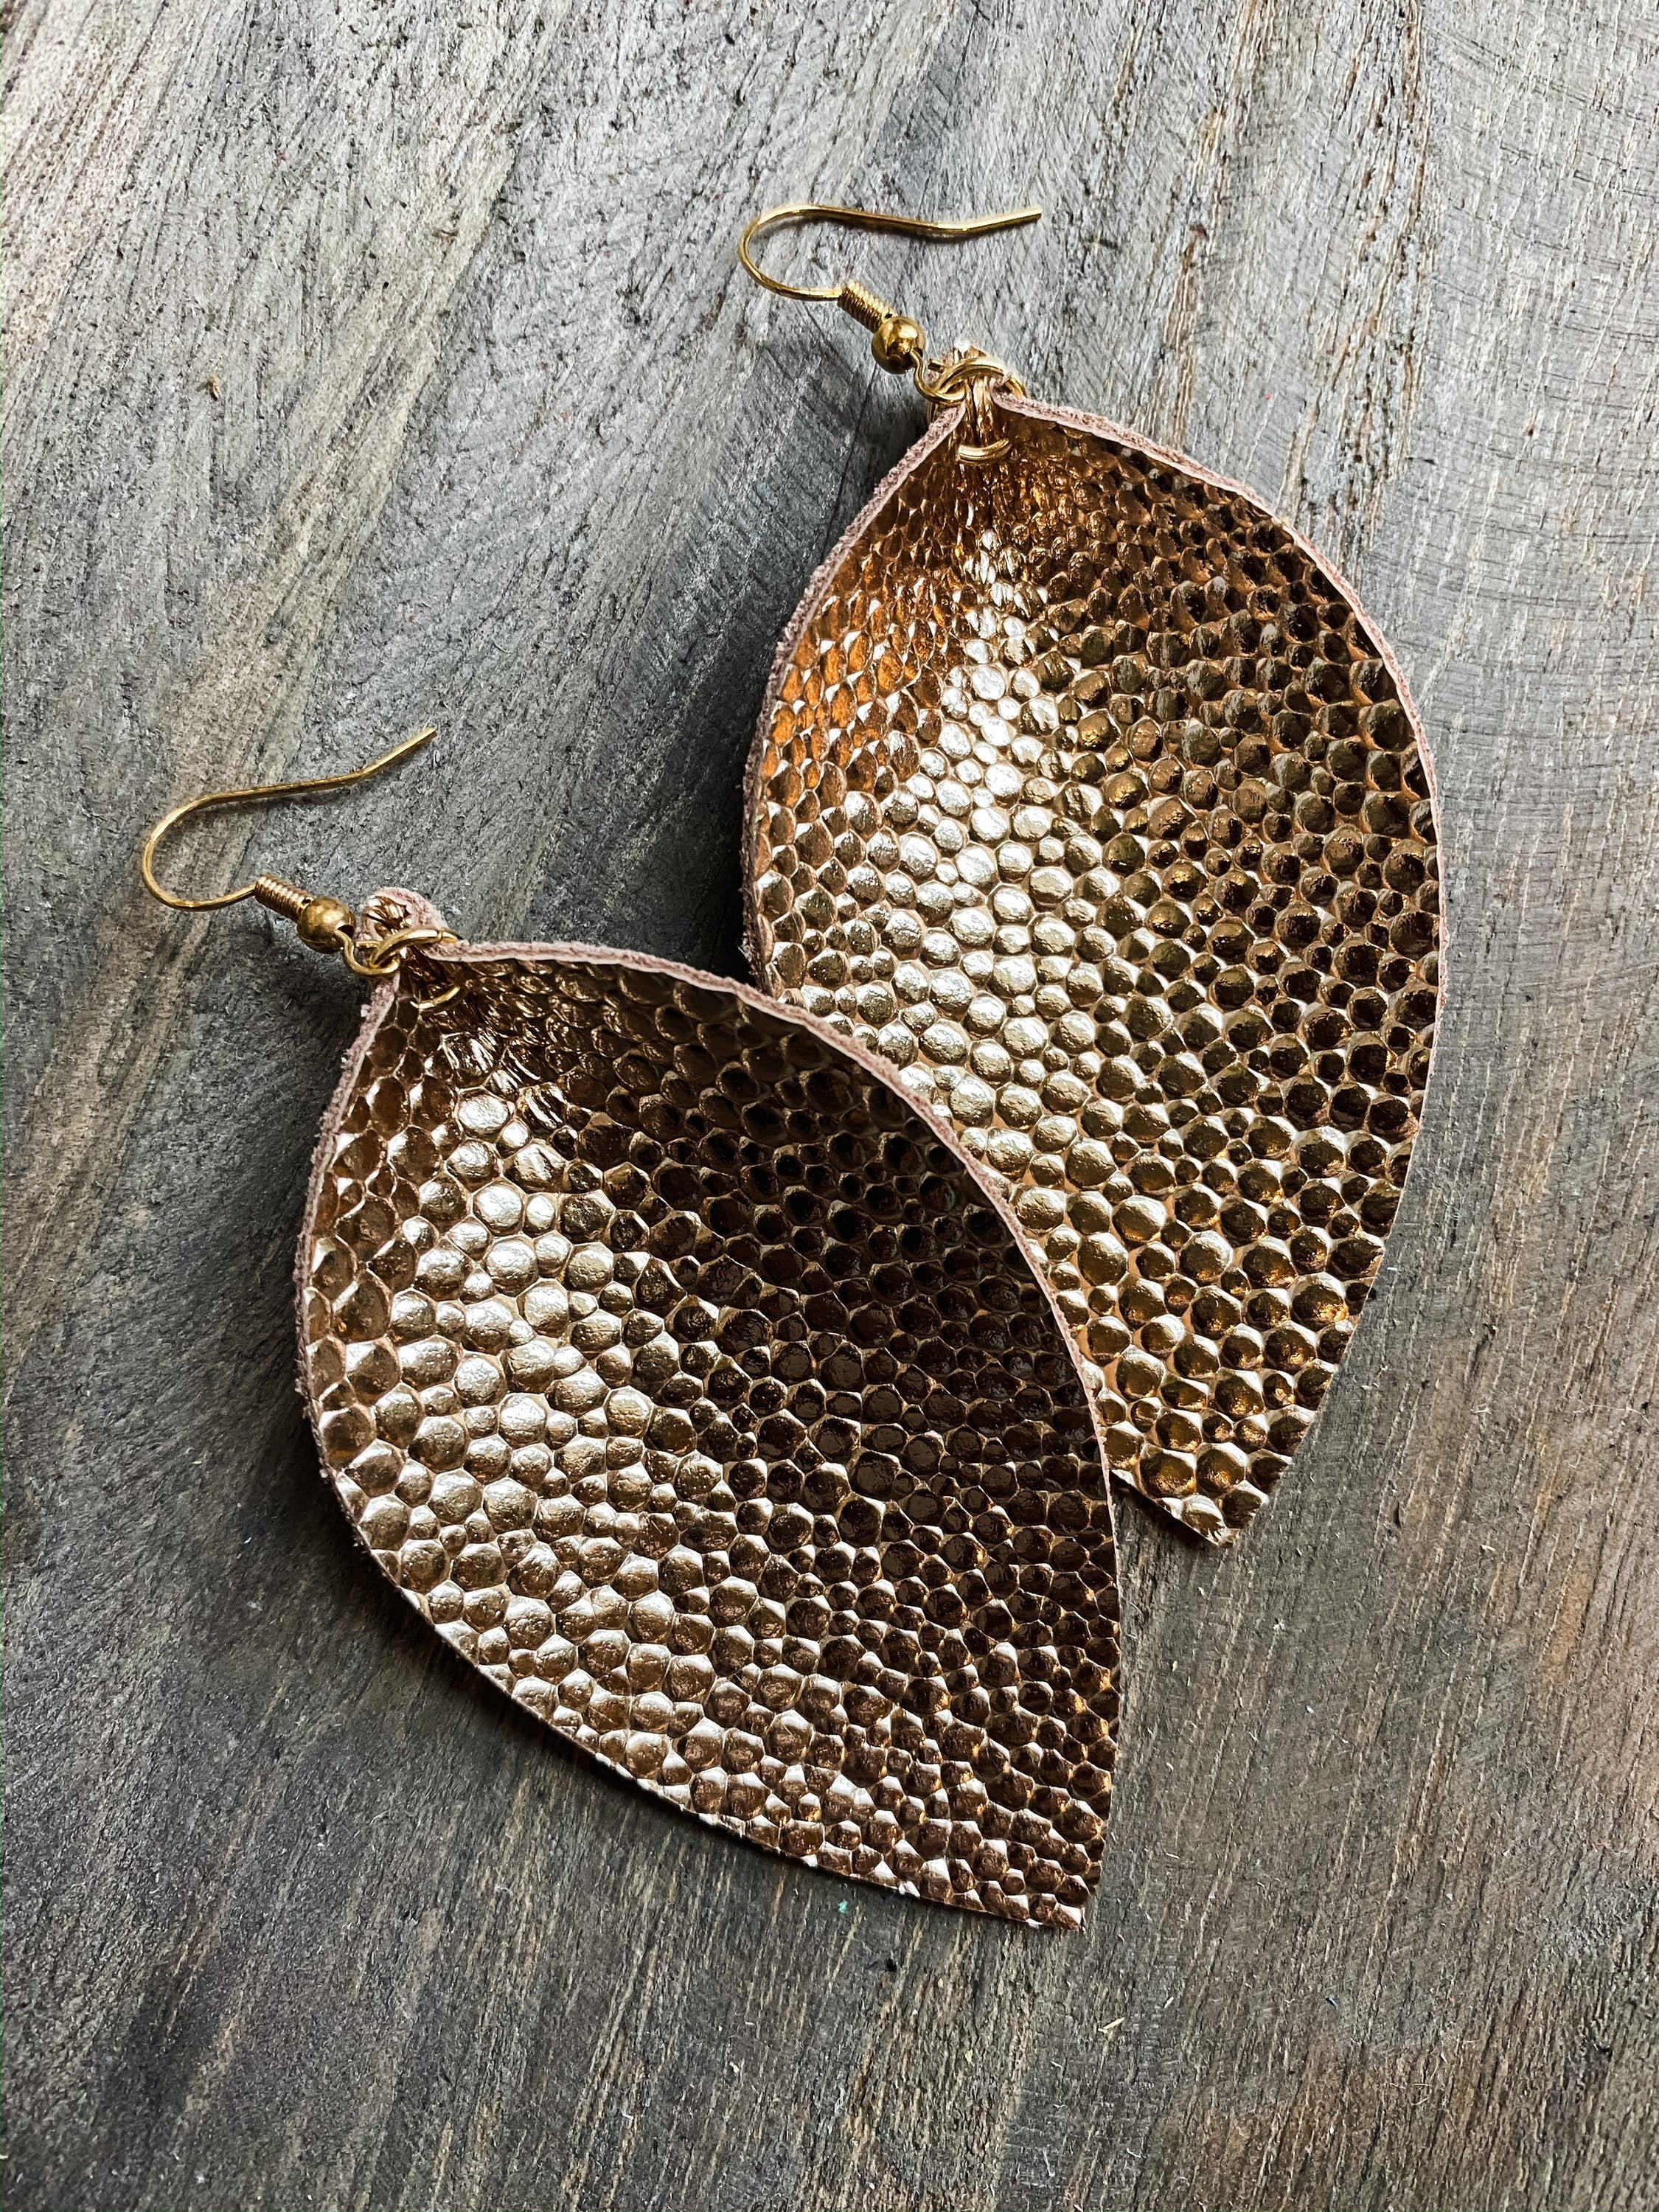 Top more than 151 leather leaf earrings